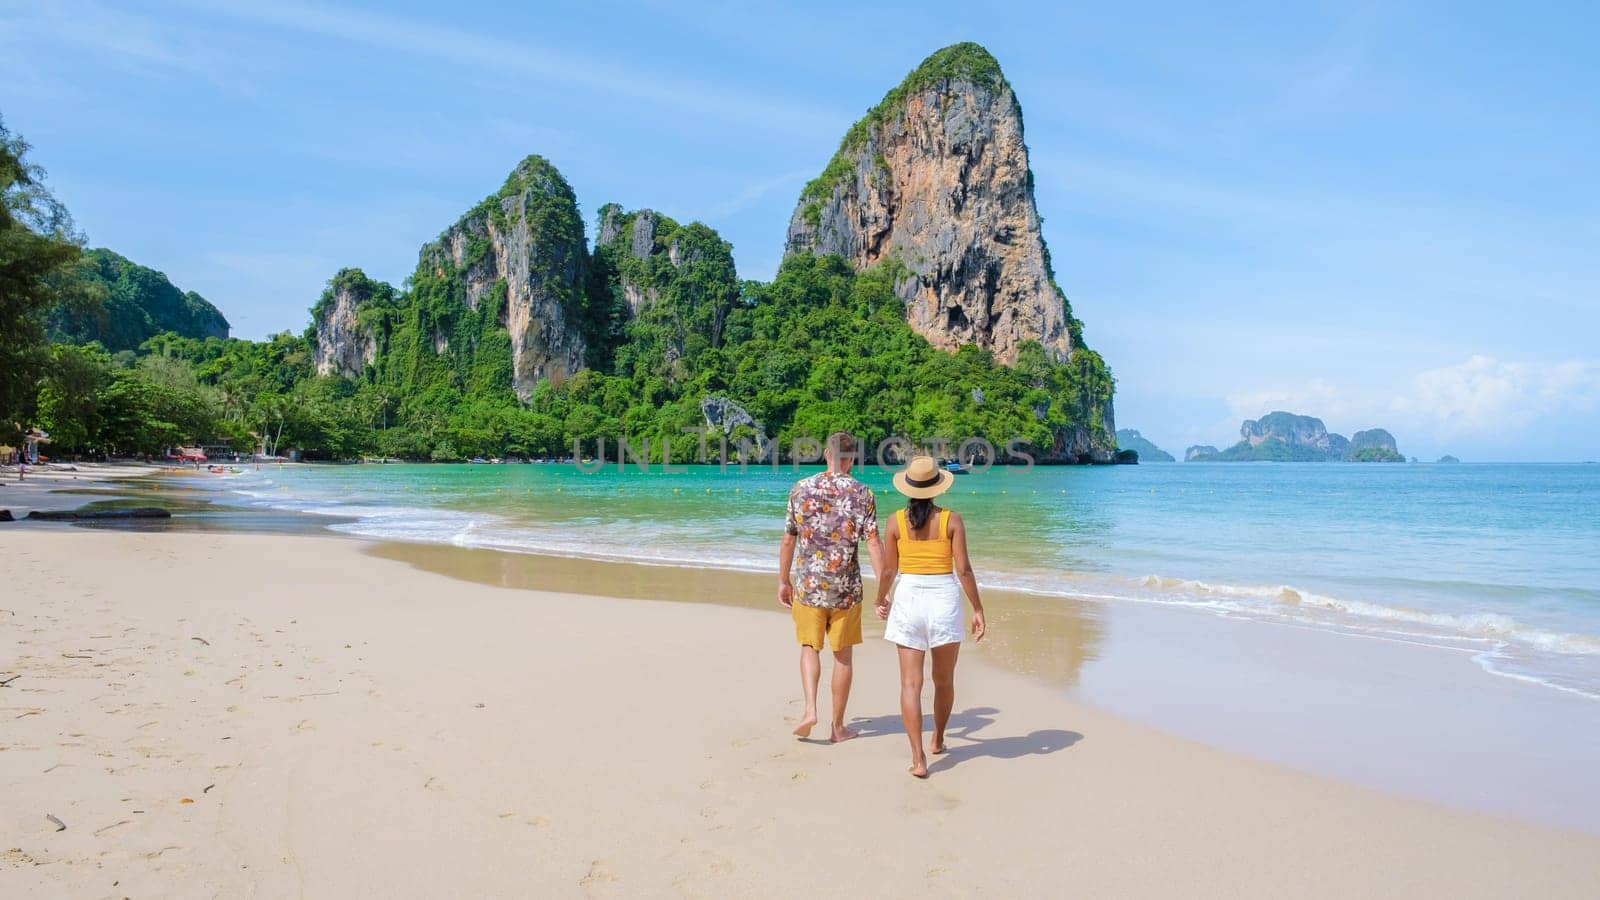 Railay Beach Krabi Thailand, the tropical beach of Railay Krabi, a couple of men and women on the beach, Panoramic view of idyllic Railay Beach in Thailand on a sunny day with a blue sky